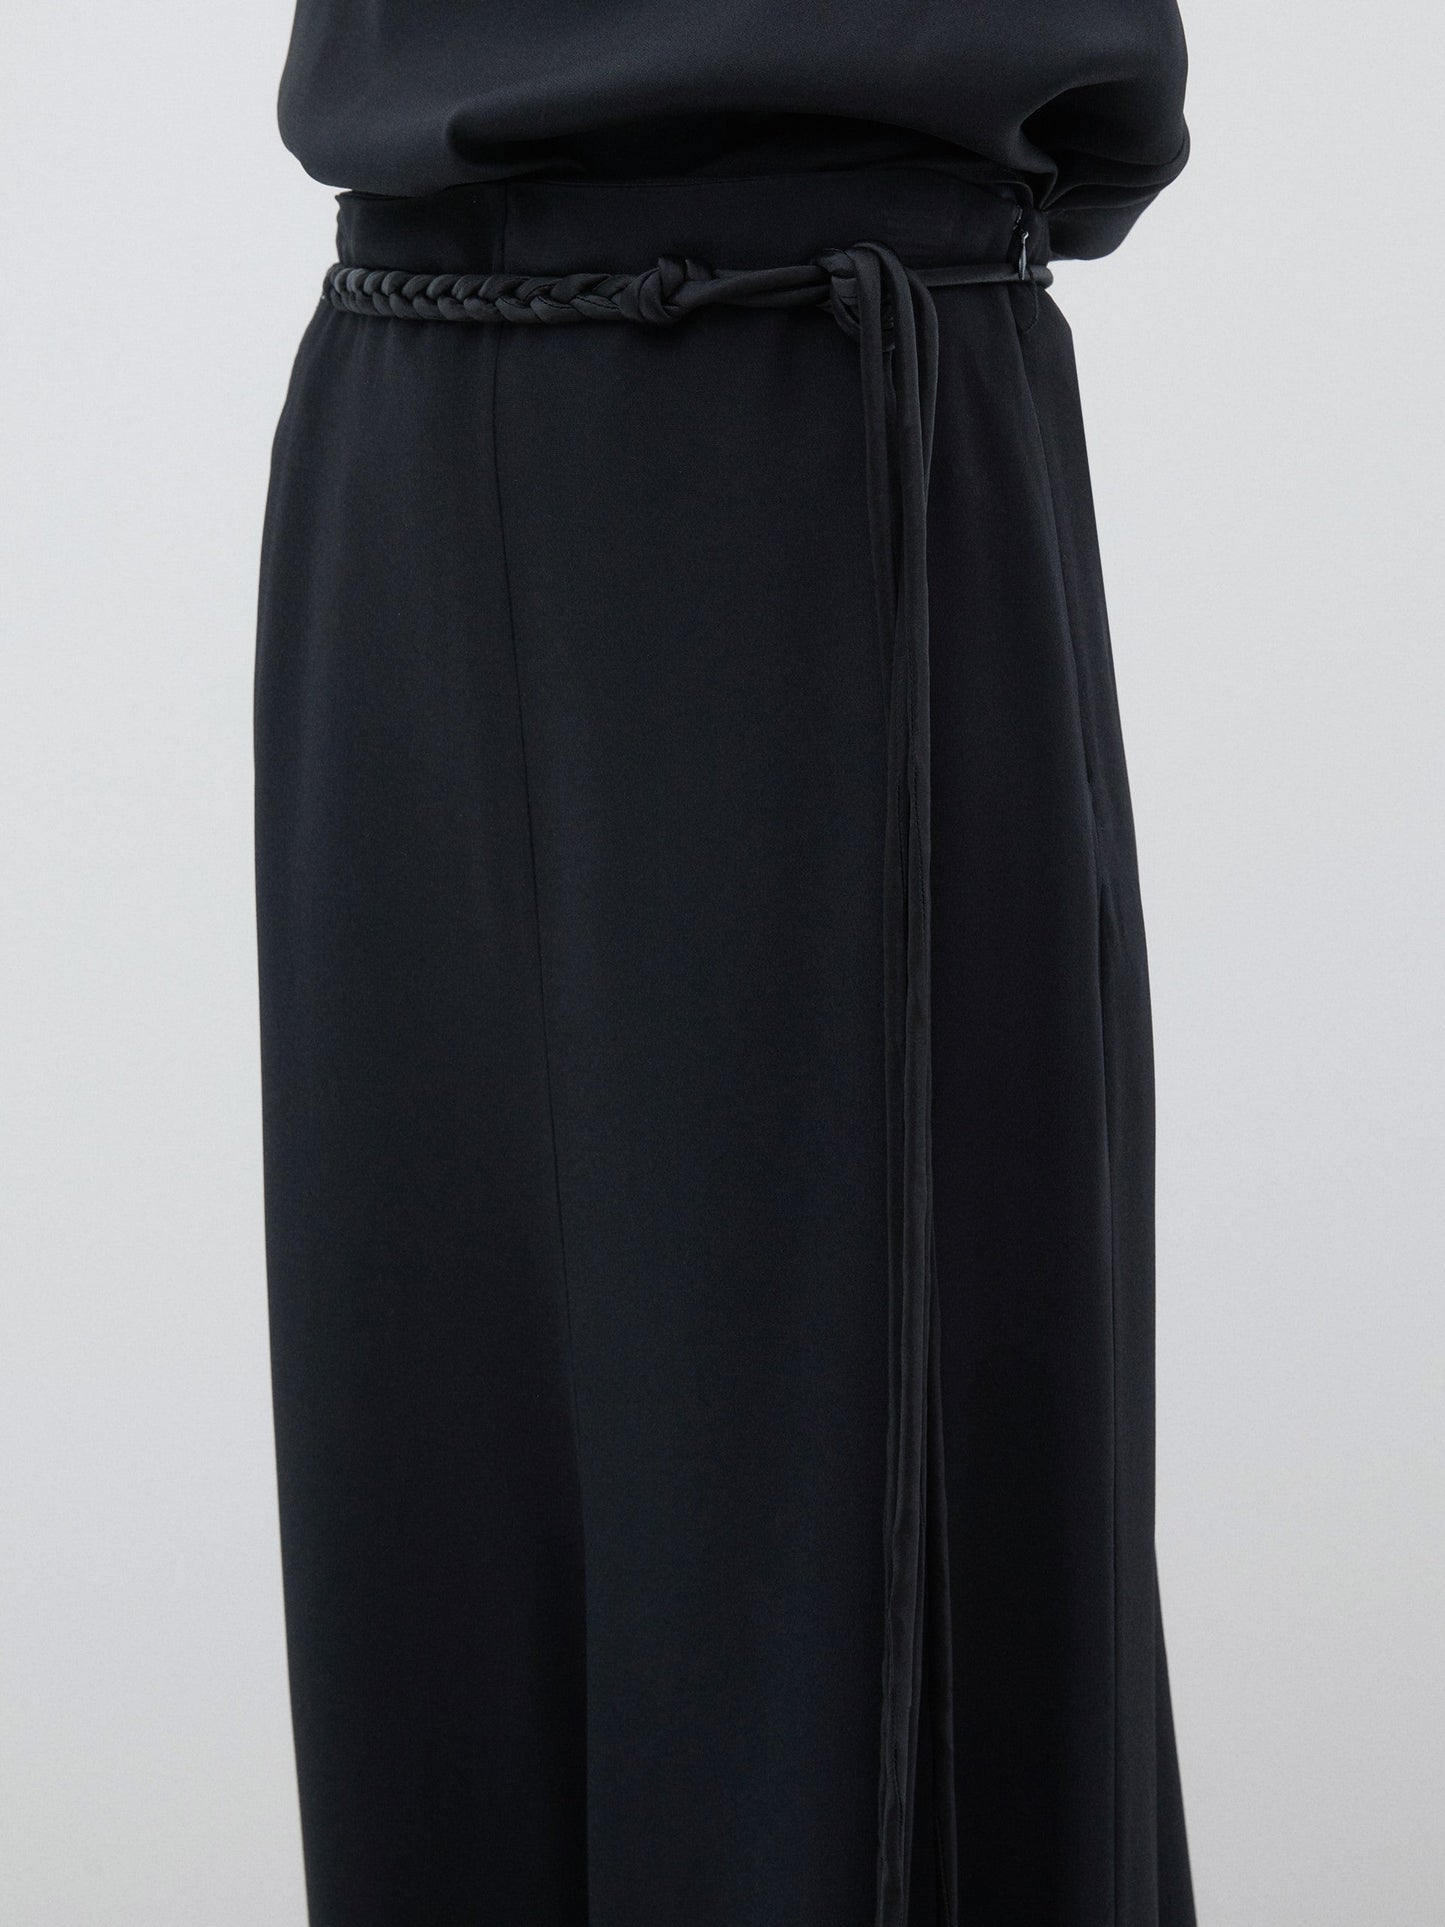 Long Black Skirt With Knit Cord Belt